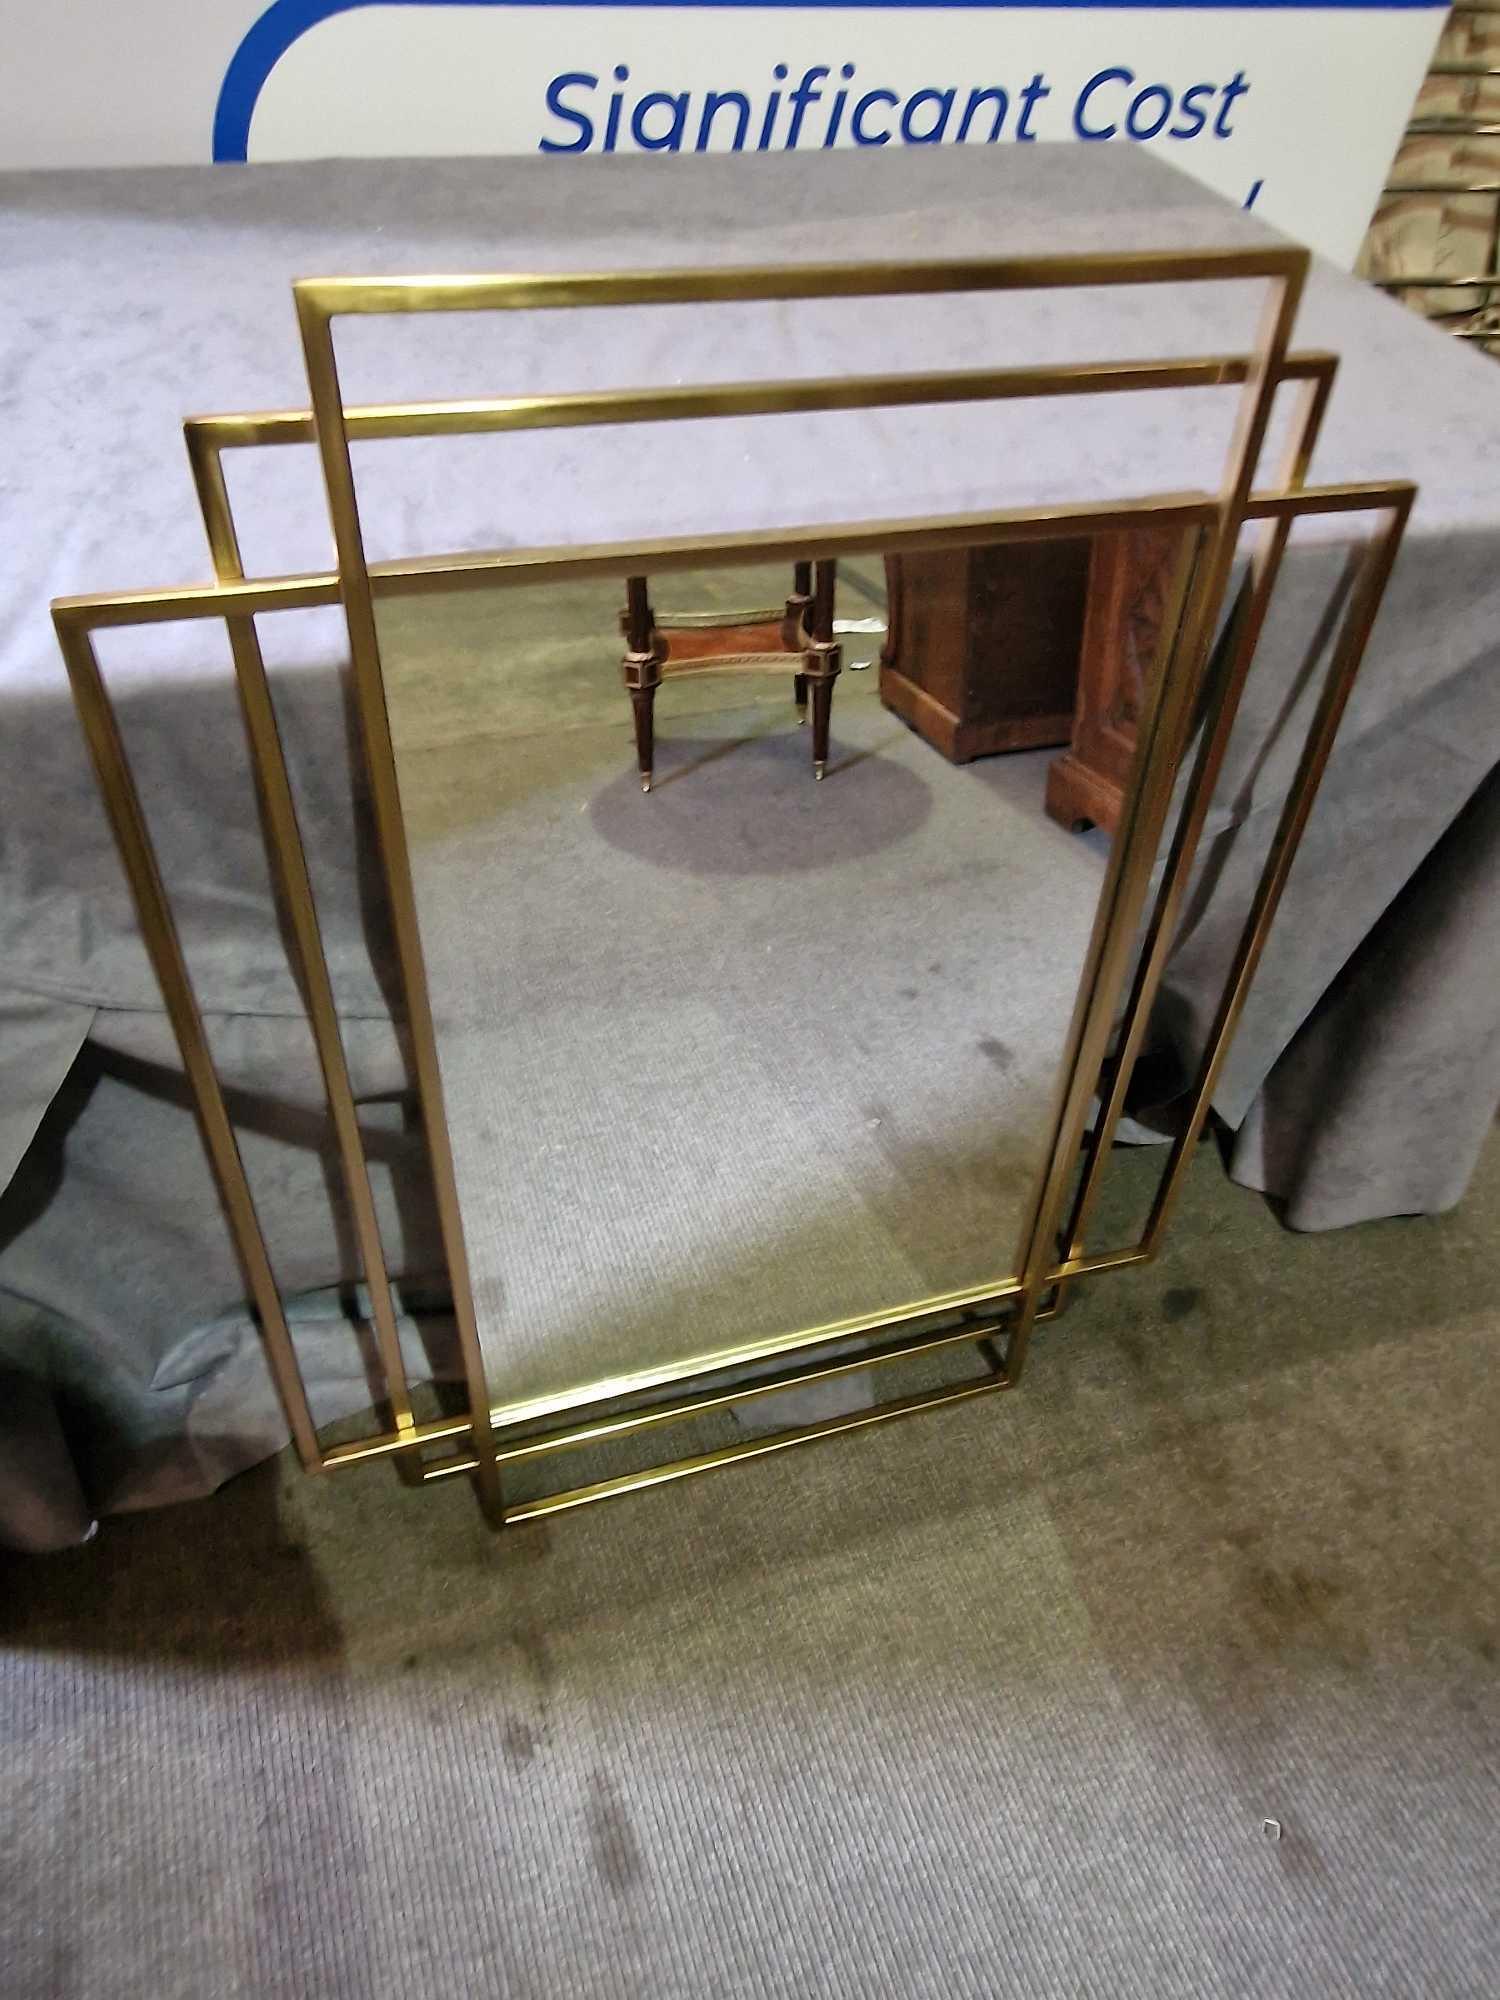 Shanghai Wall Mirror, 90 X 70cm, Brass Overlapping Frames With Enamel Lining And A Brass Finish - Image 2 of 3